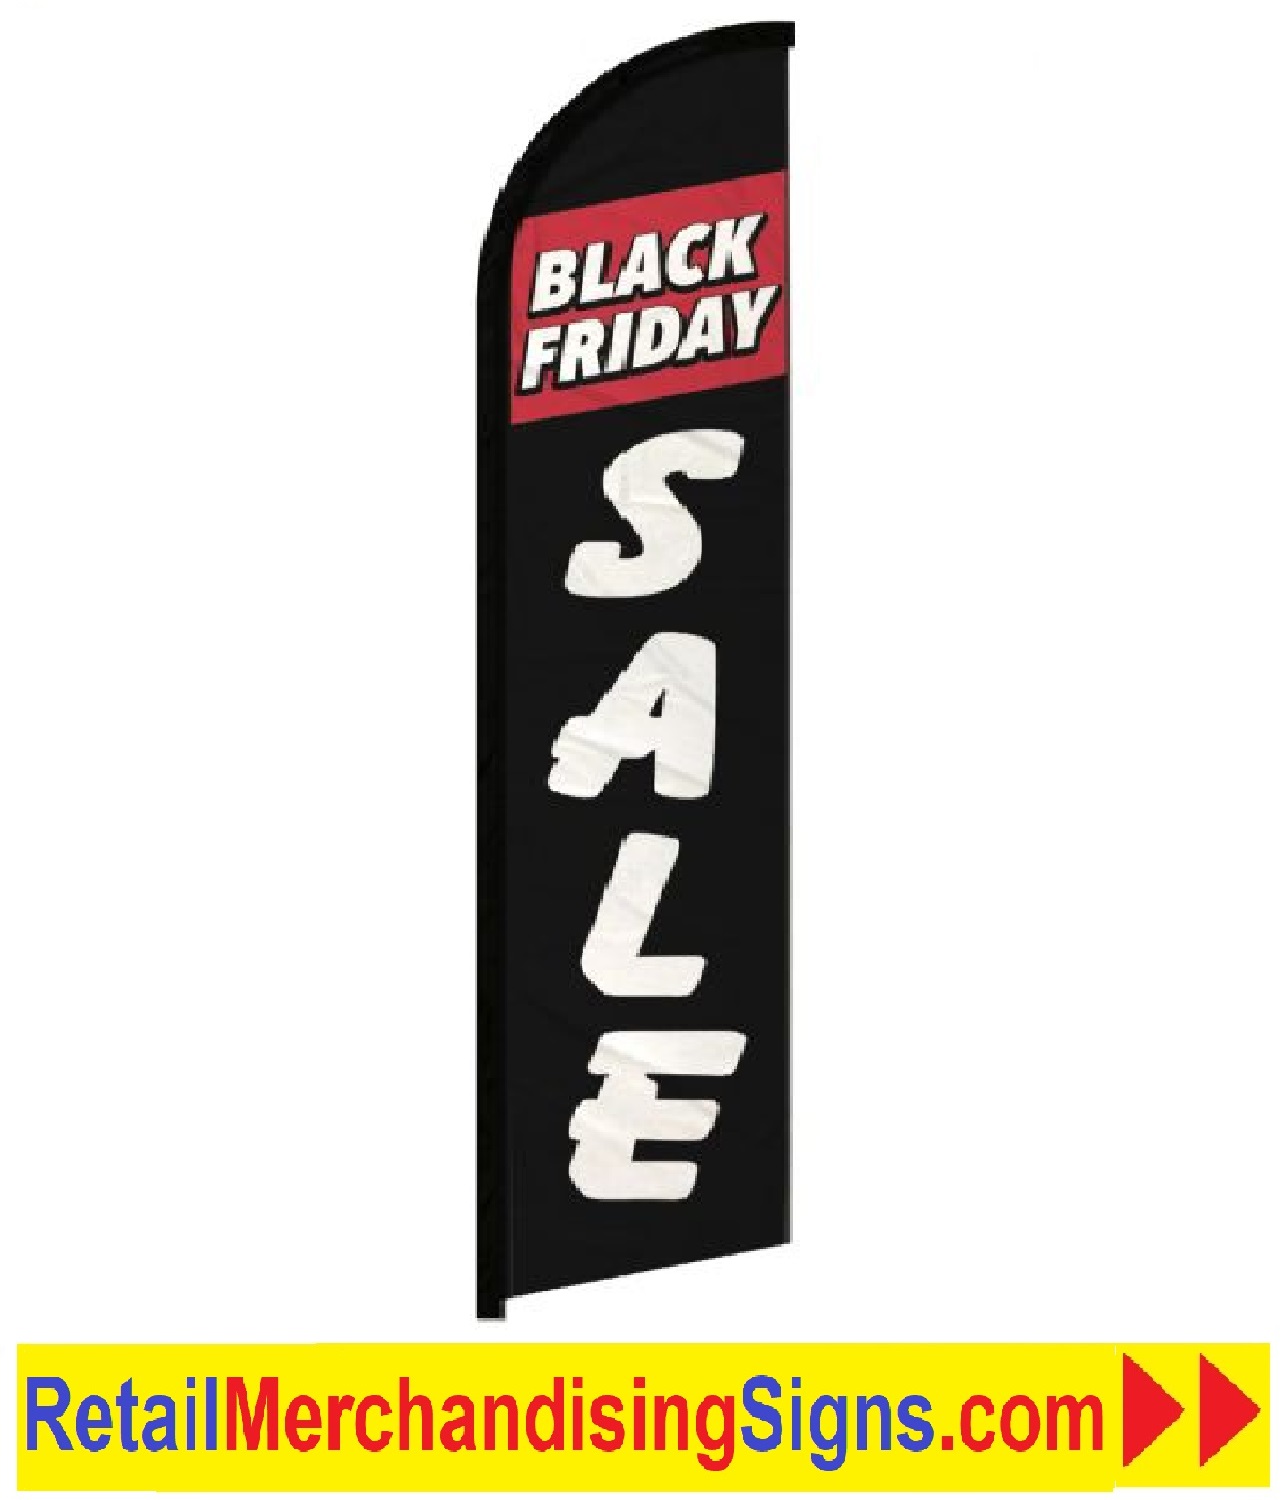 SALE Closing Down All Stock Must Go Signage Colour Sign Printed Heavy Duty 4128 